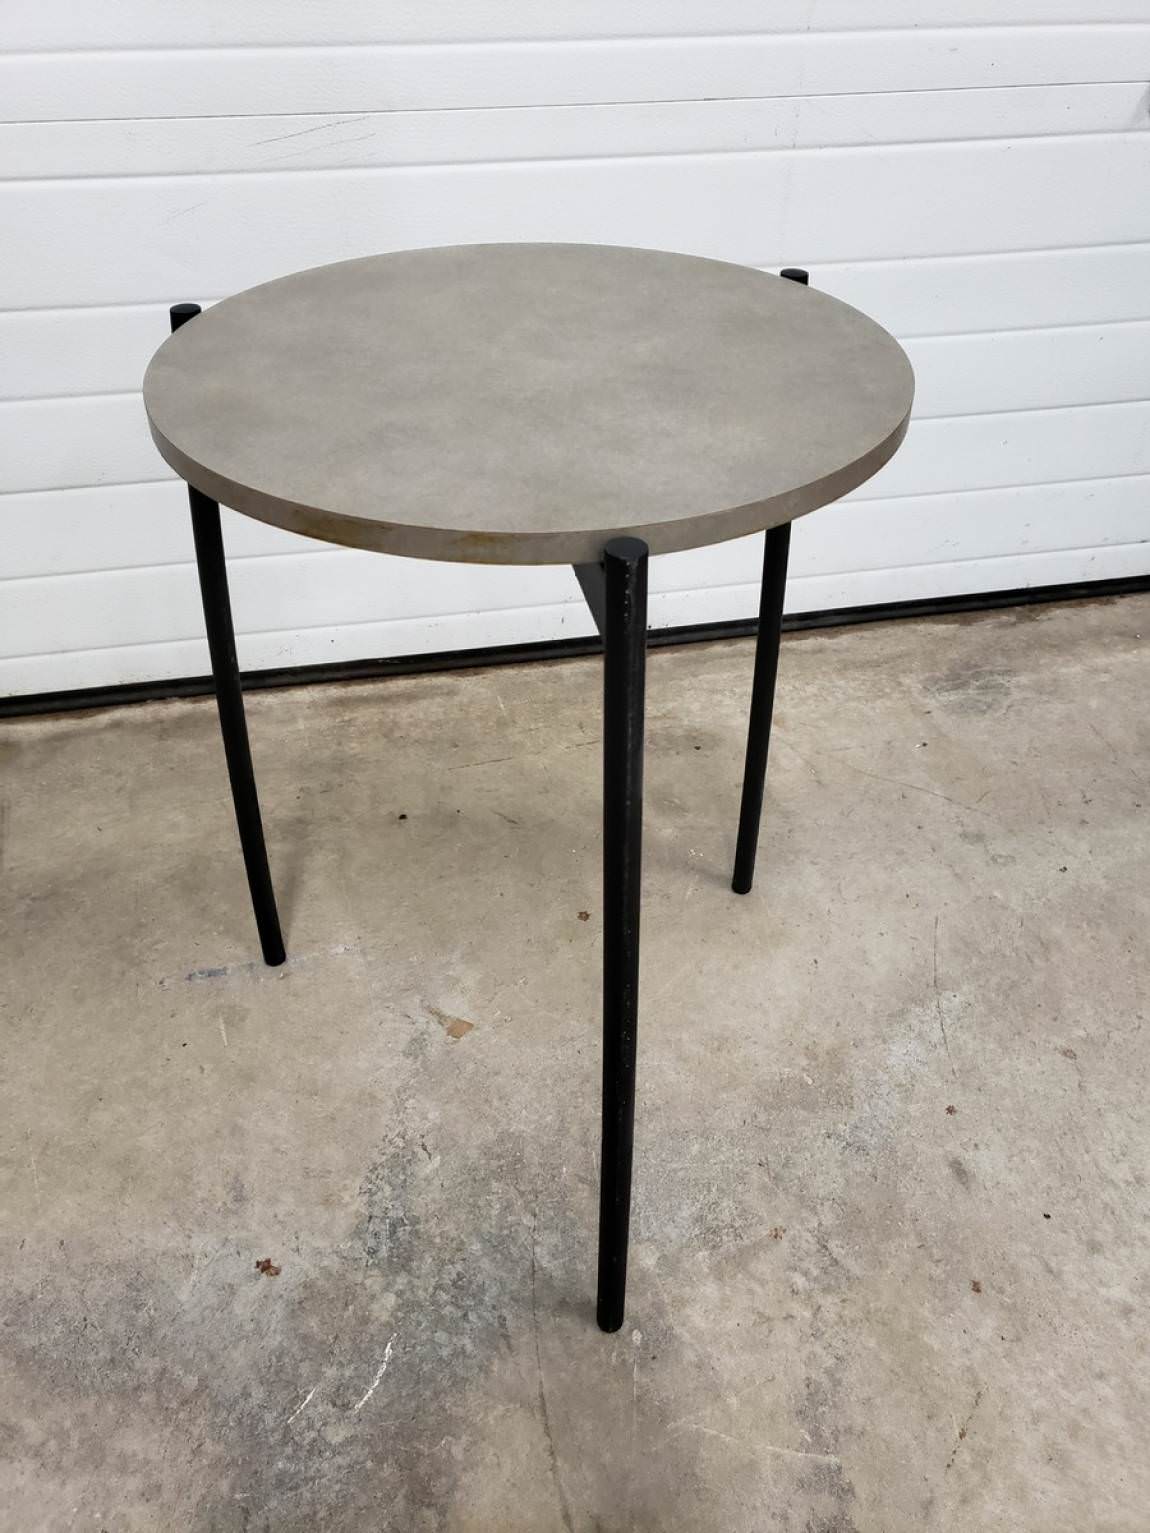 17” Round Table with Gray Top